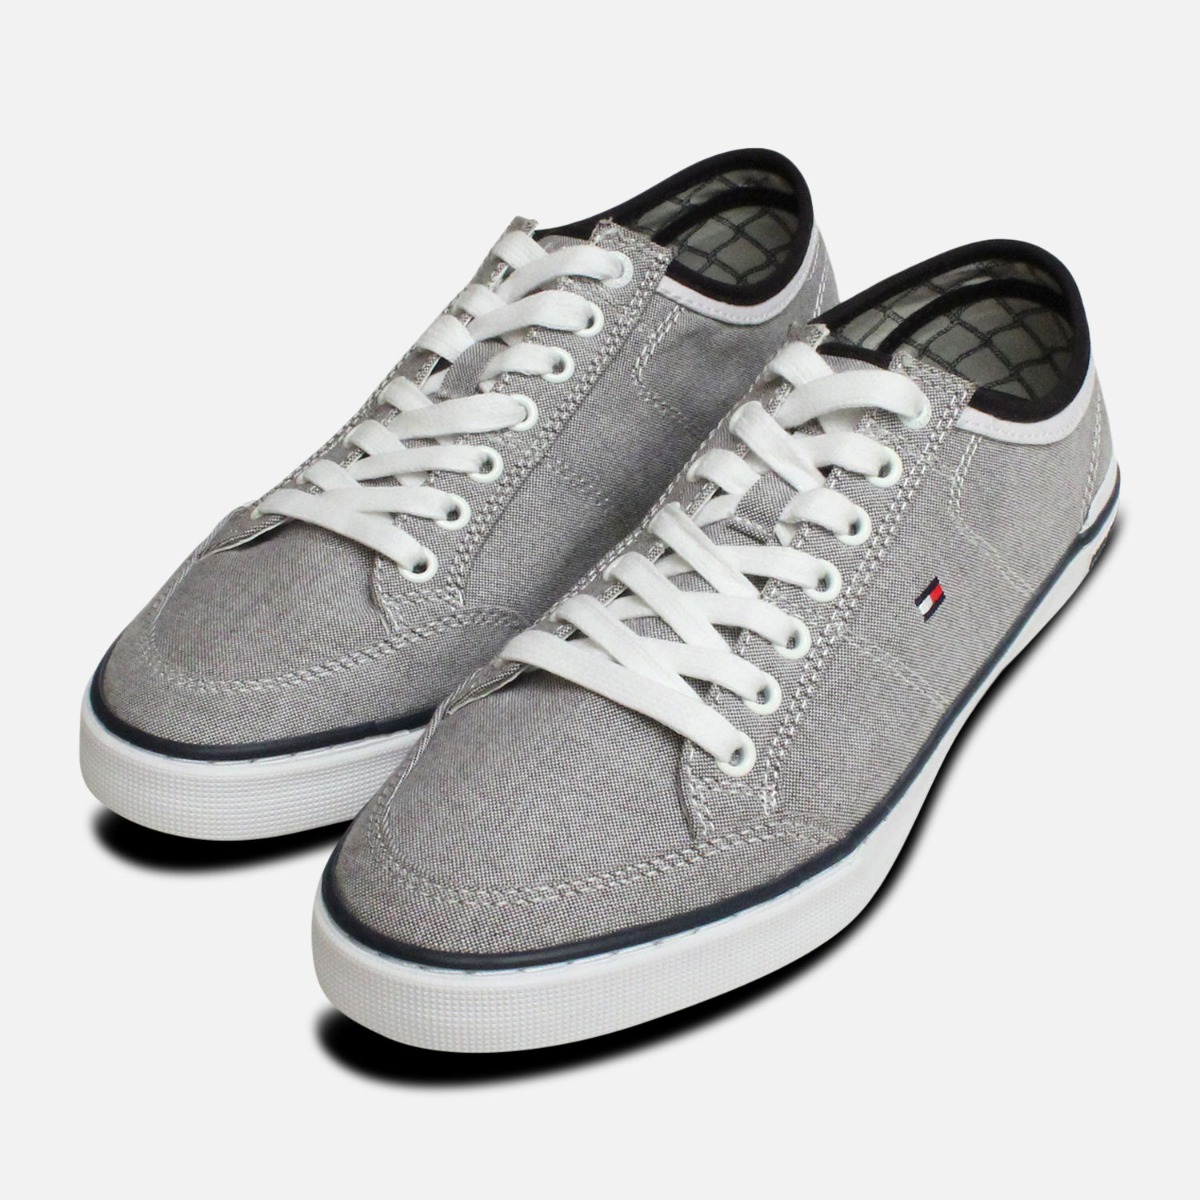 mens grey lace up shoes